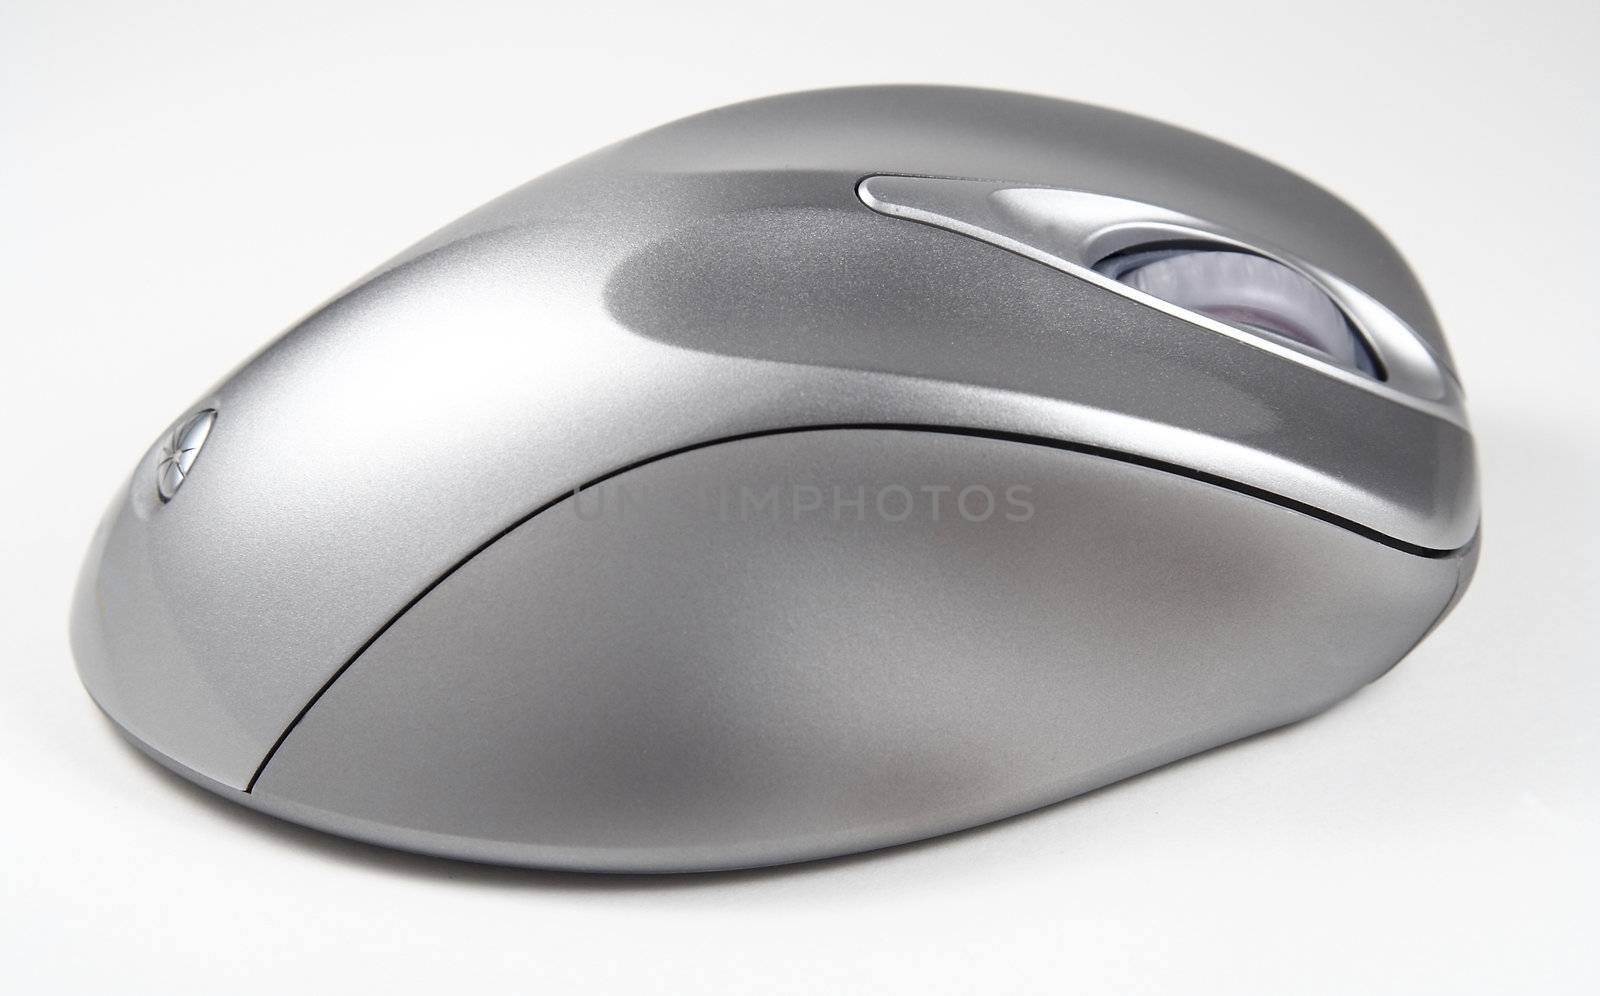 Cordless optical mouse on white background by serpl